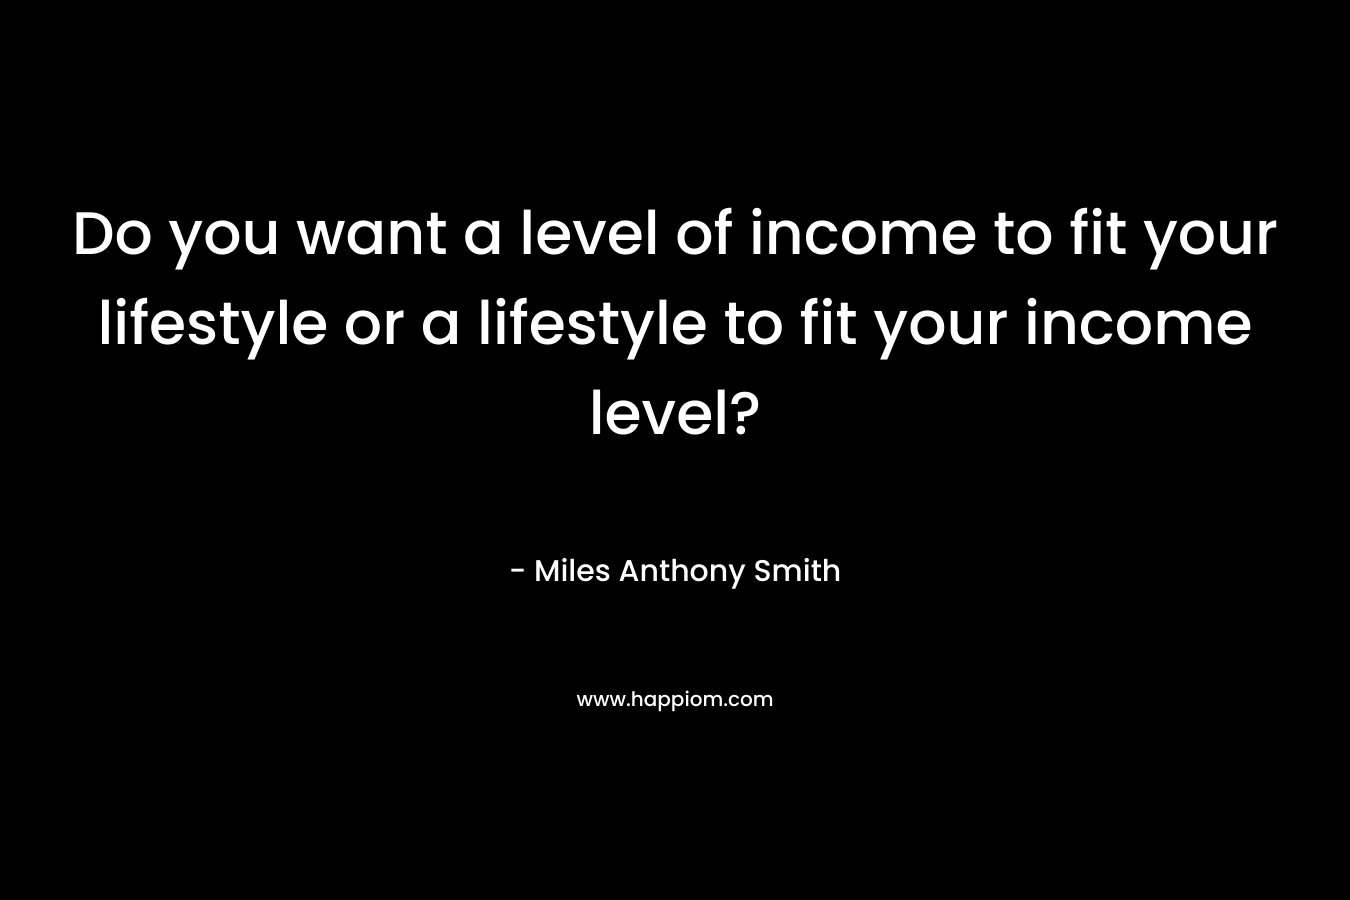 Do you want a level of income to fit your lifestyle or a lifestyle to fit your income level?